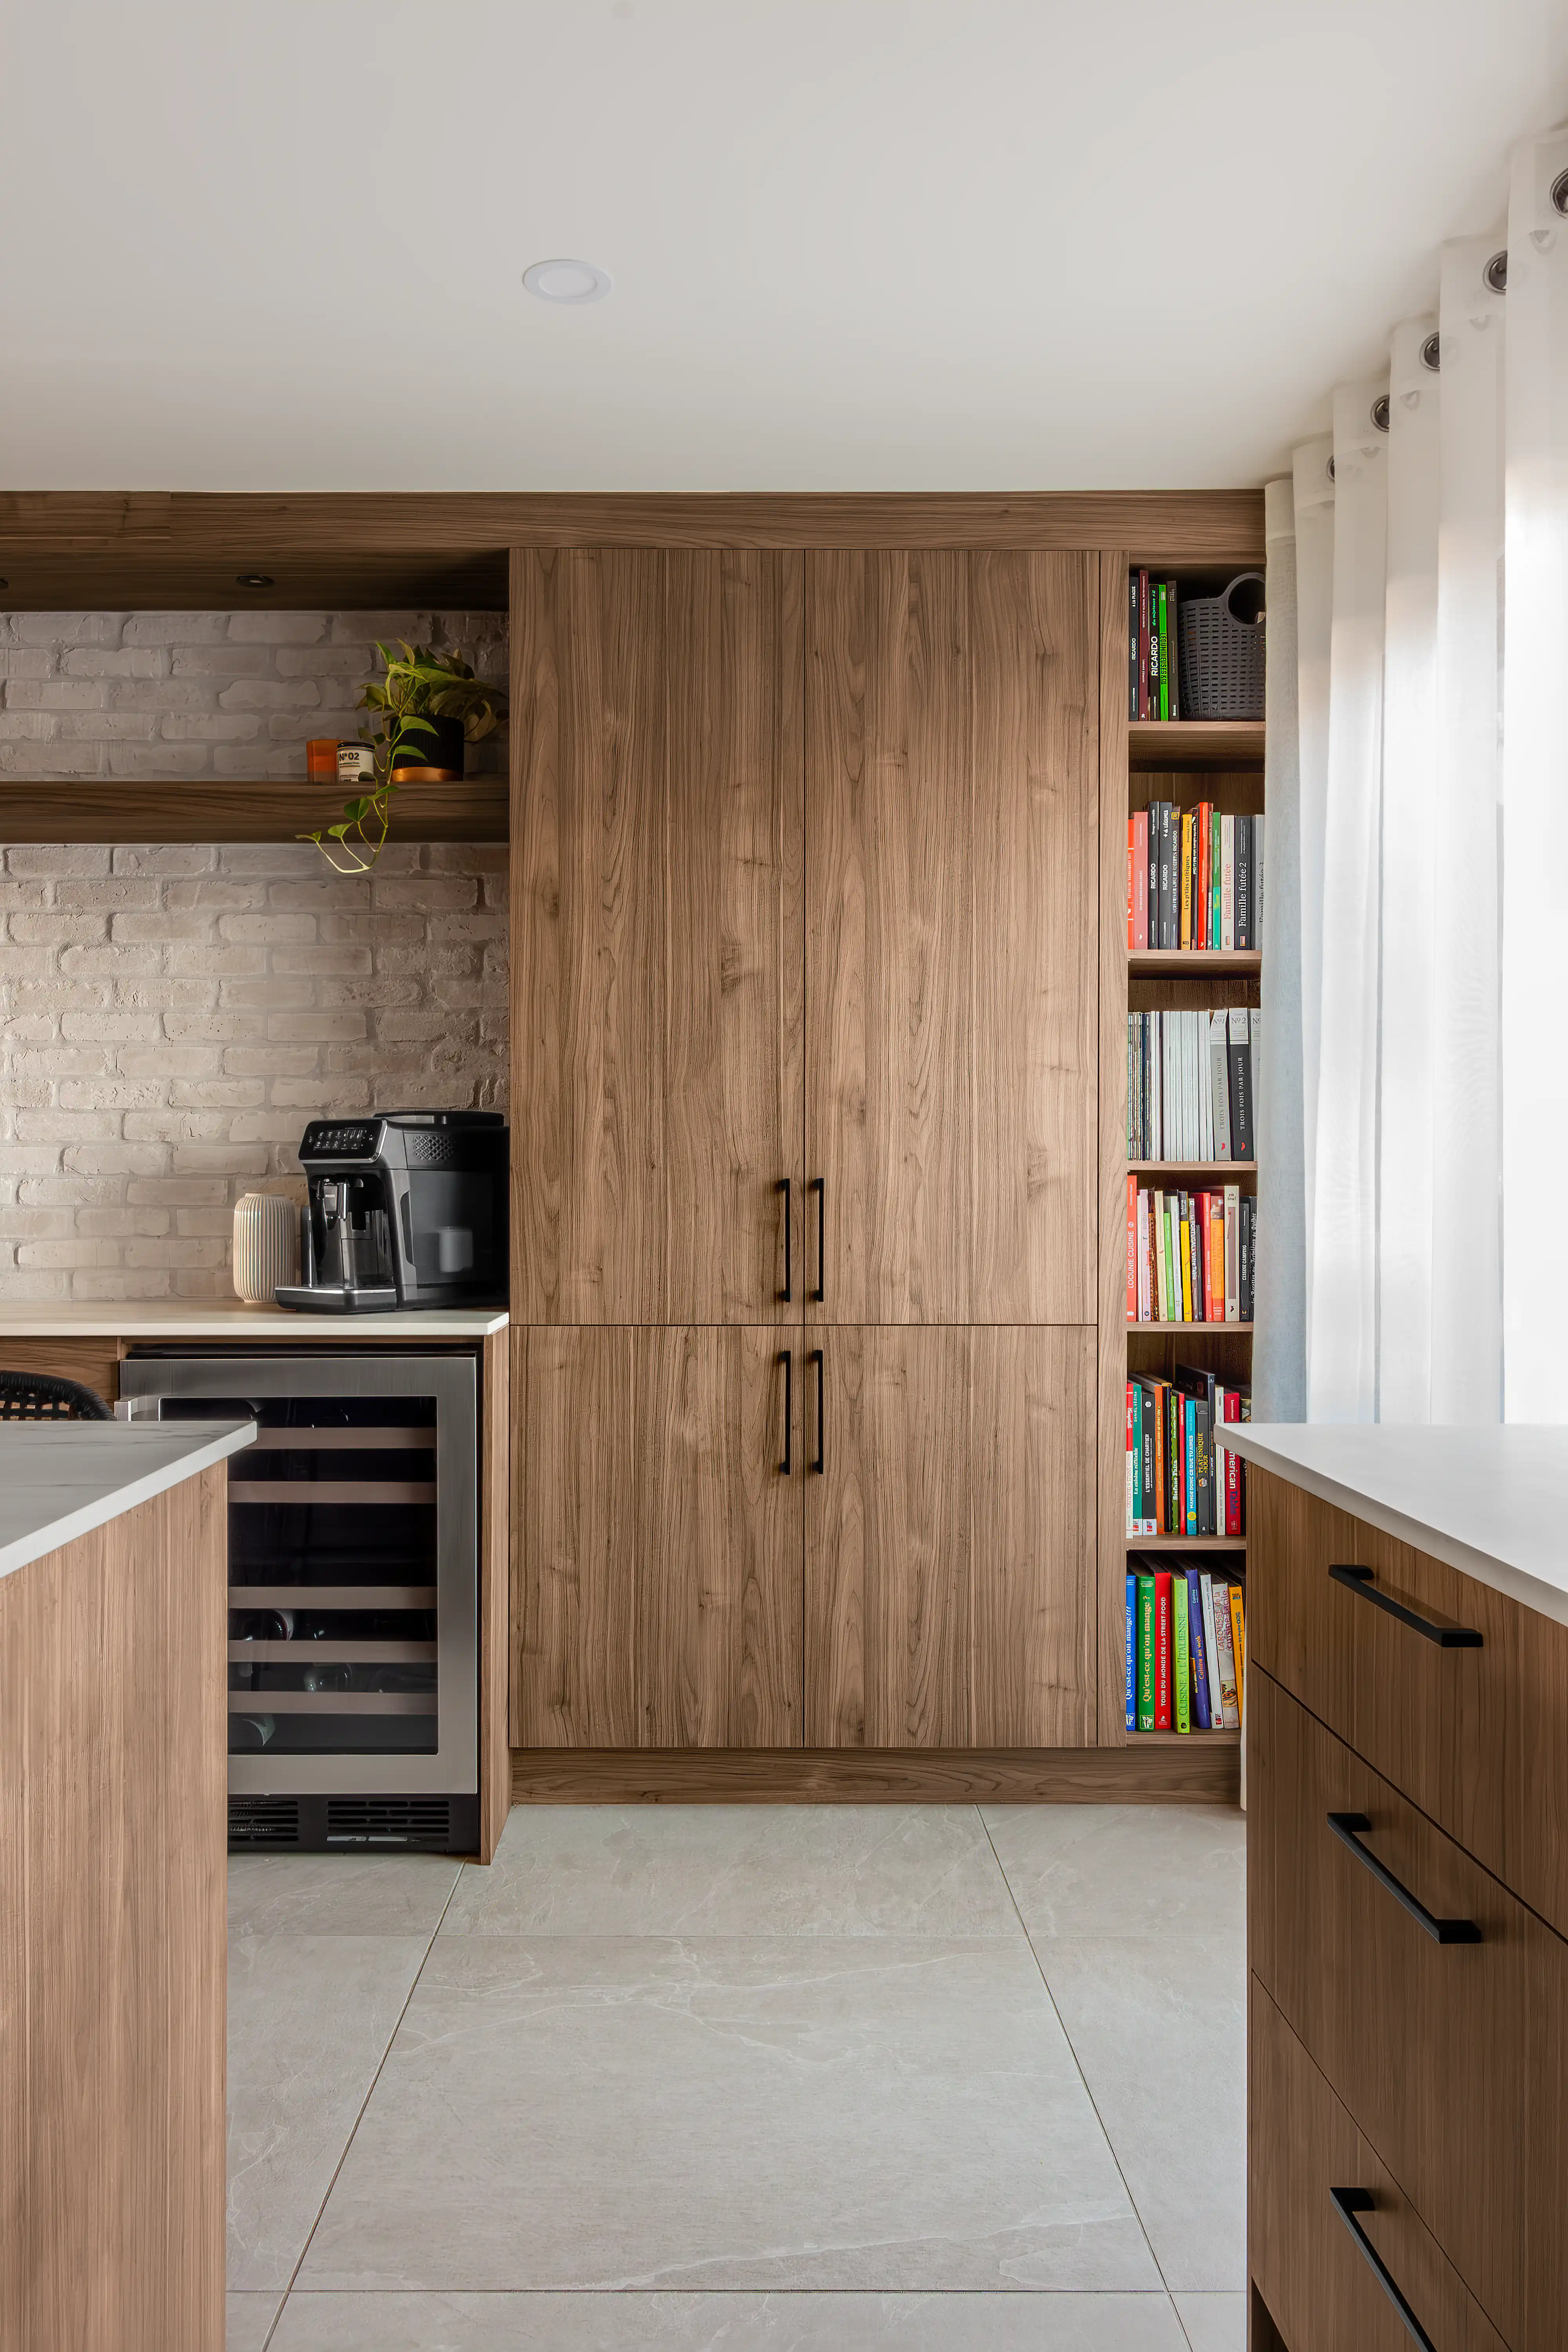 Scandinavian style kitchenette with wooden cabinetry and a built-in bookshelf integrated with appliances, interior by Sarah Brown Design